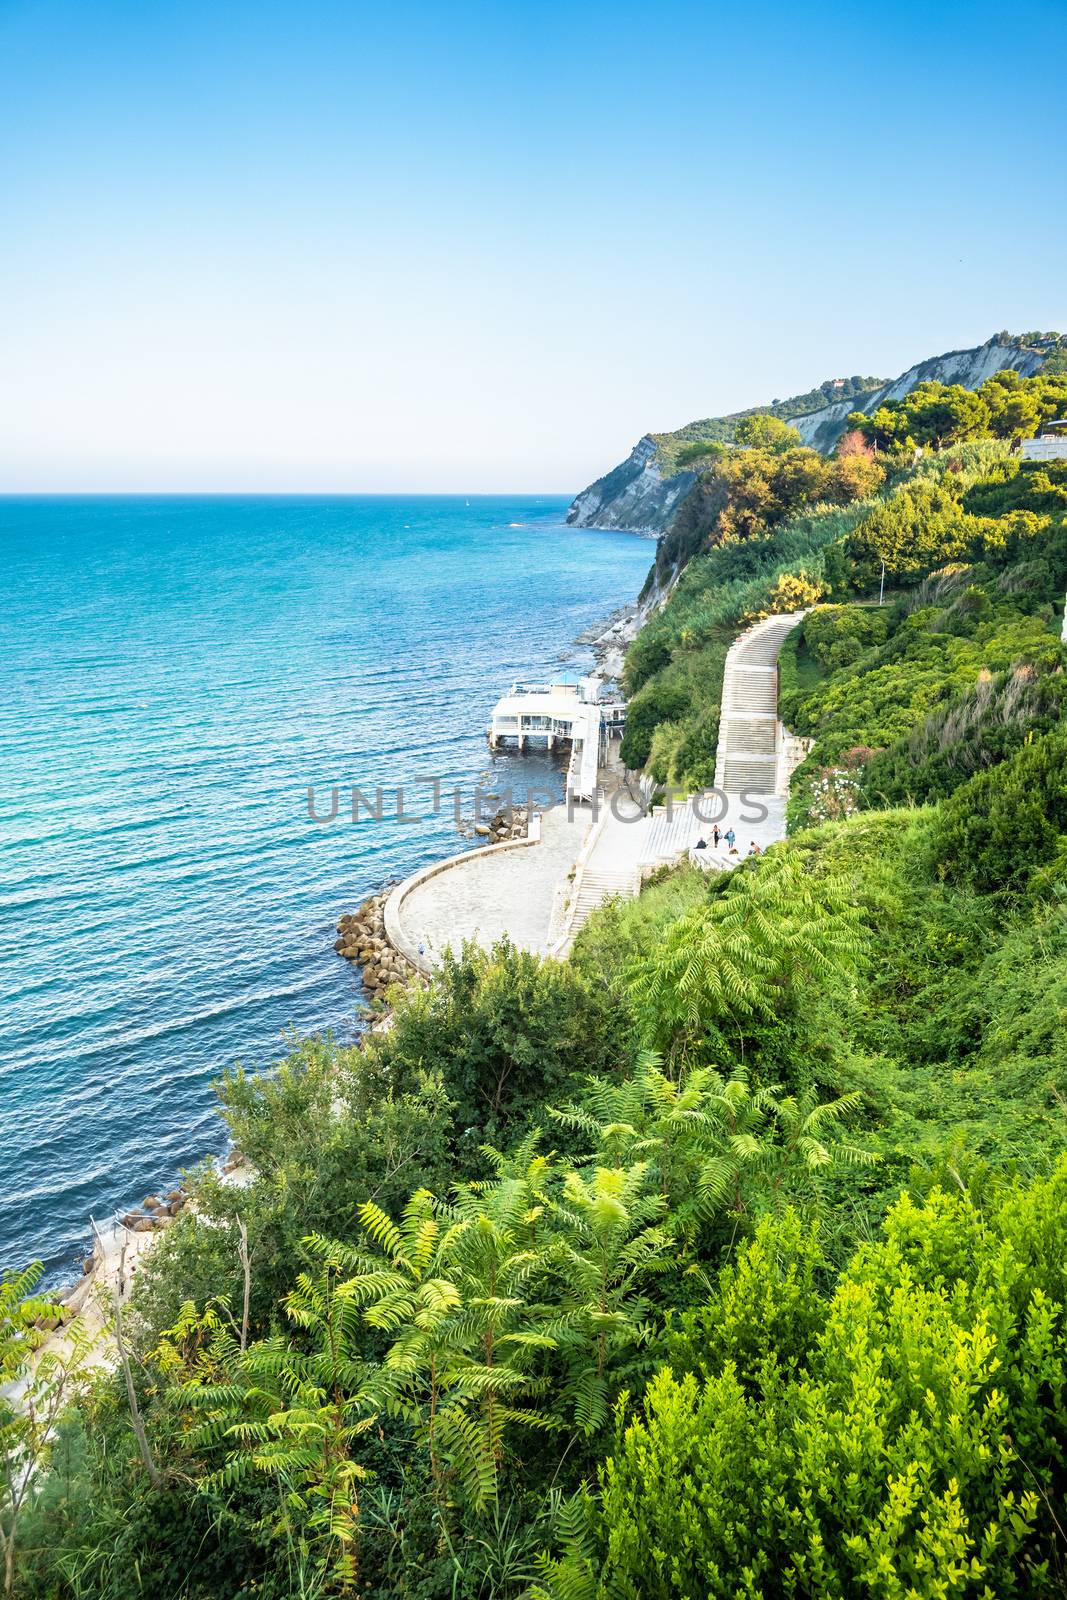 An image of a view to the sea at Ancona, Italy